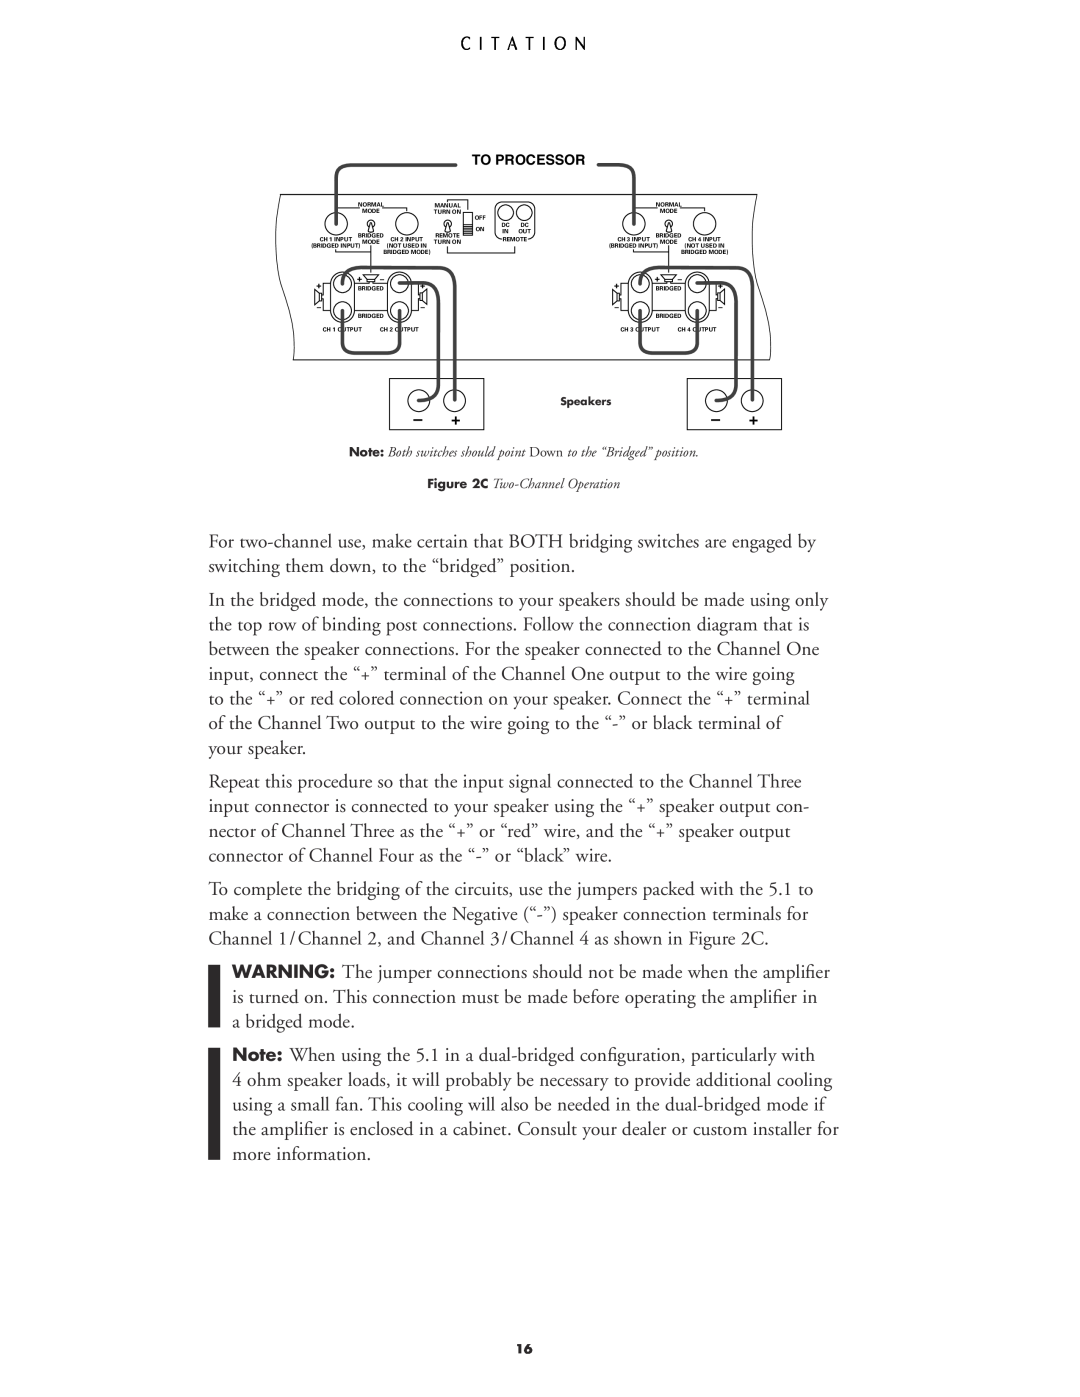 Harman-Kardon 5.1 manual Note Both switches should point Down to the “Bridged” position, C Two-Channel Operation 